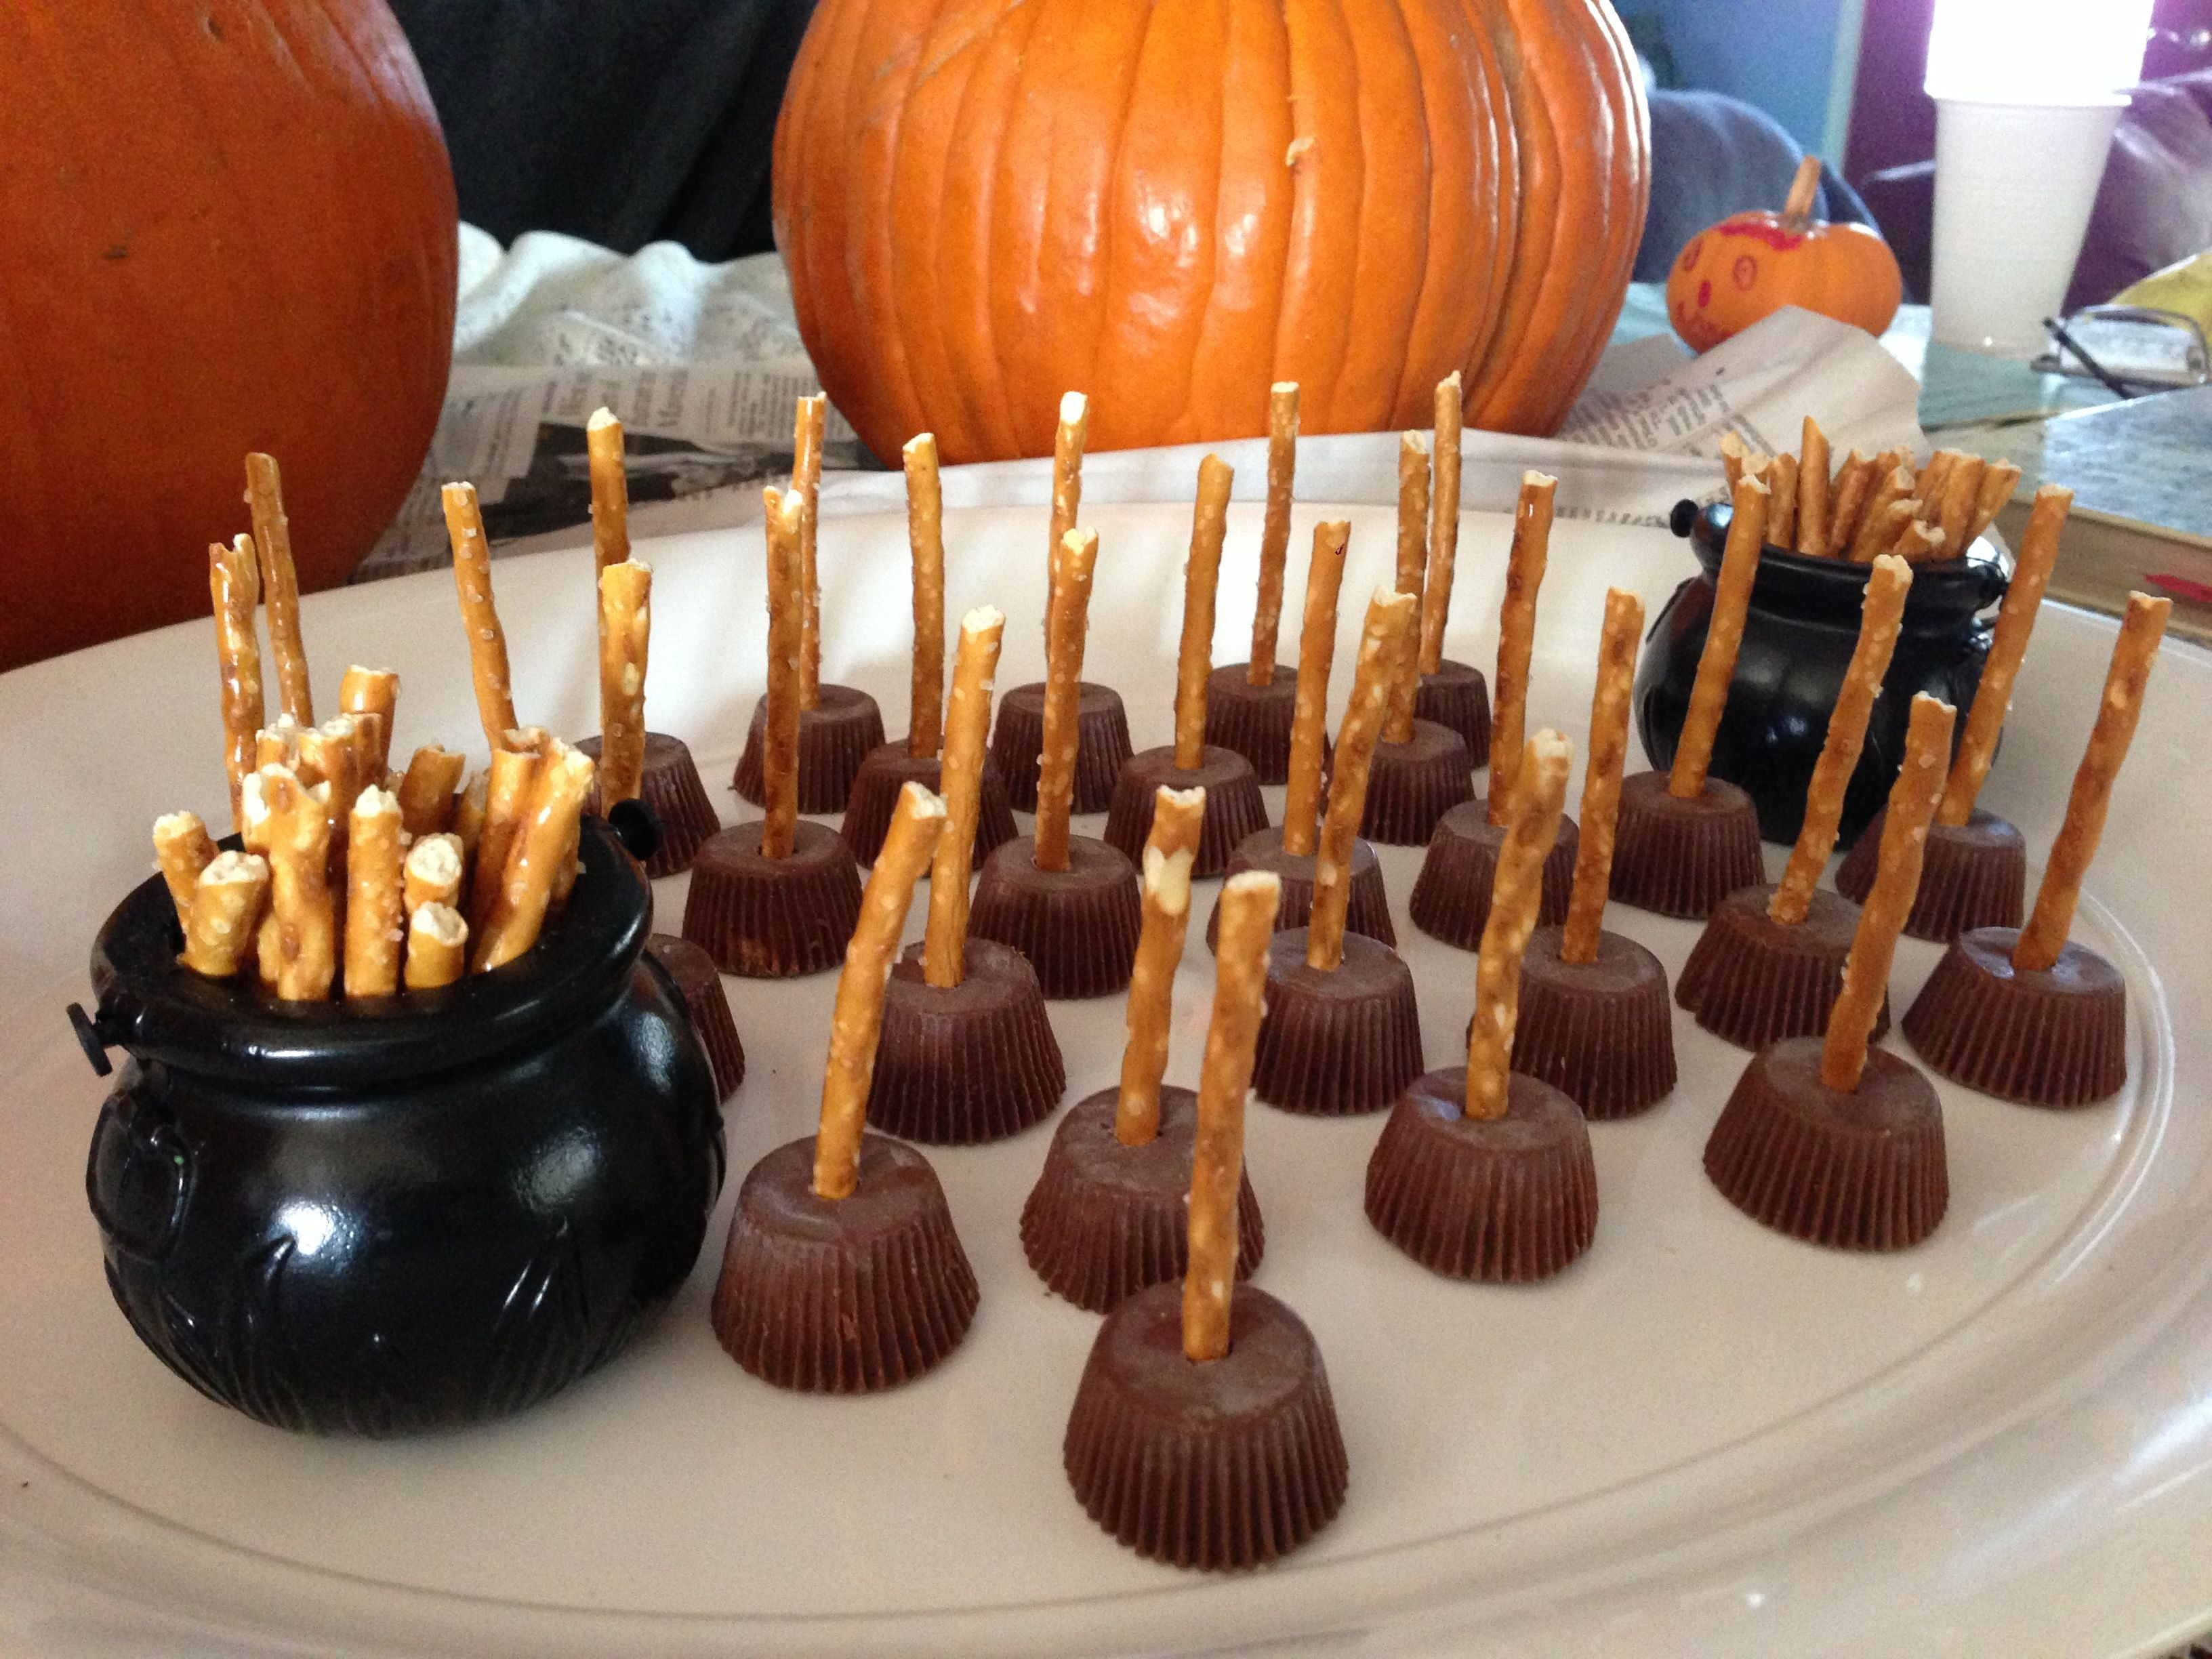 Third Grade Halloween Party Ideas
 Witches broomsticks for 3rd grade classroom party today